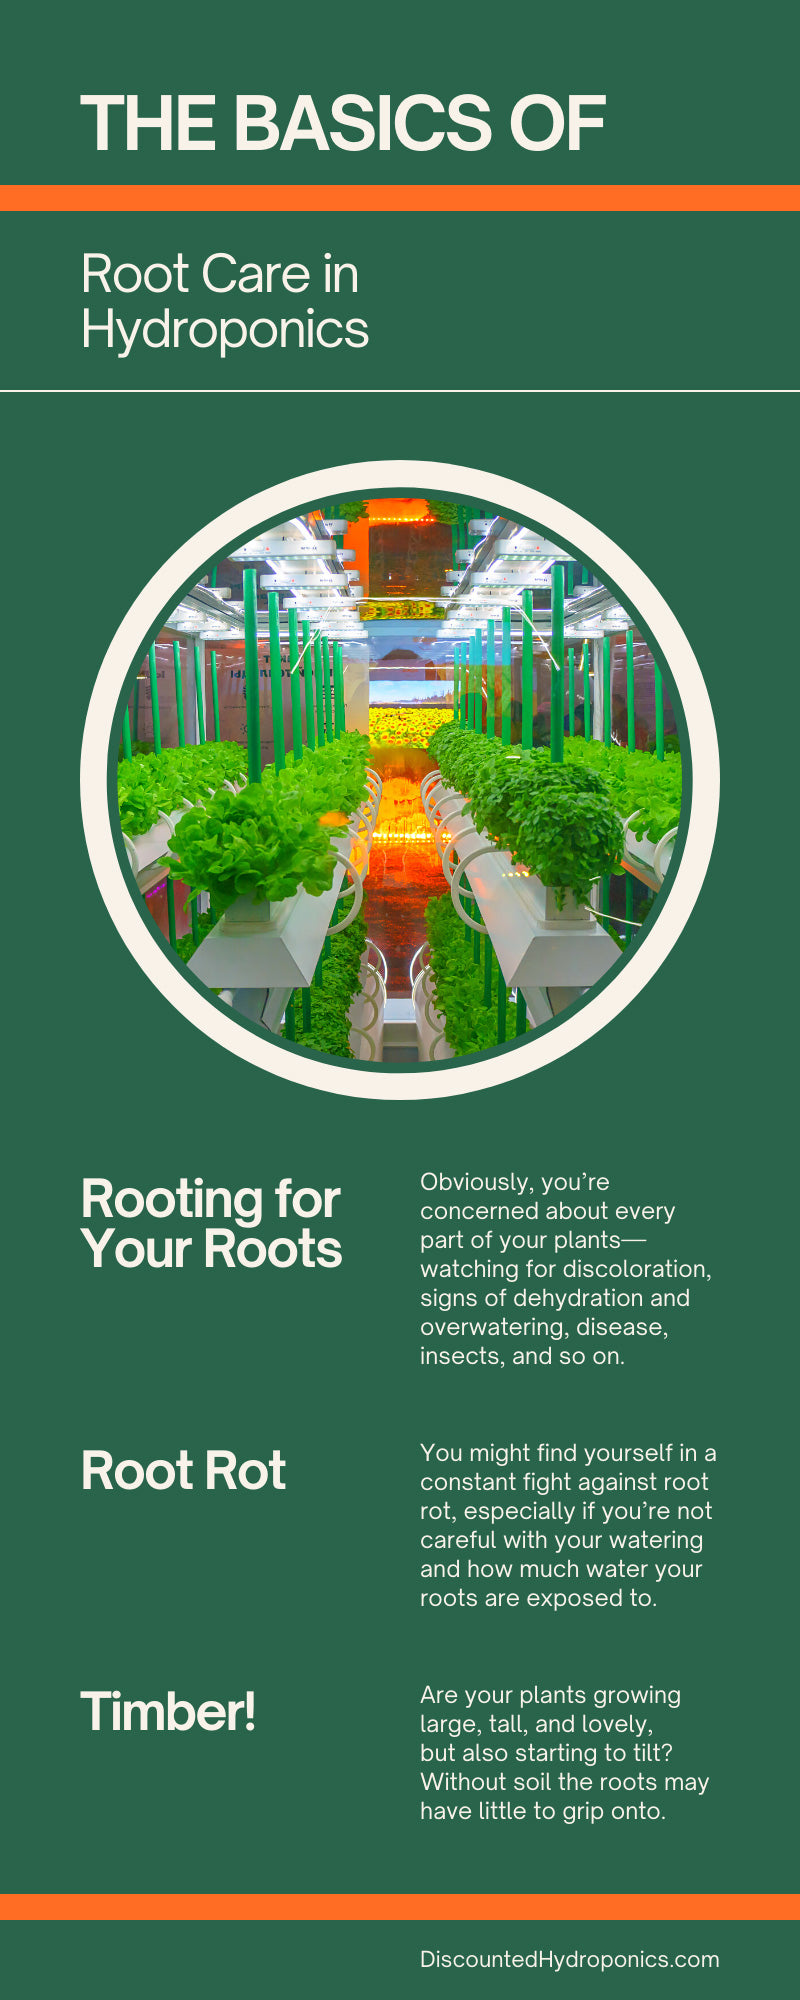 The Basics of Root Care in Hydroponics